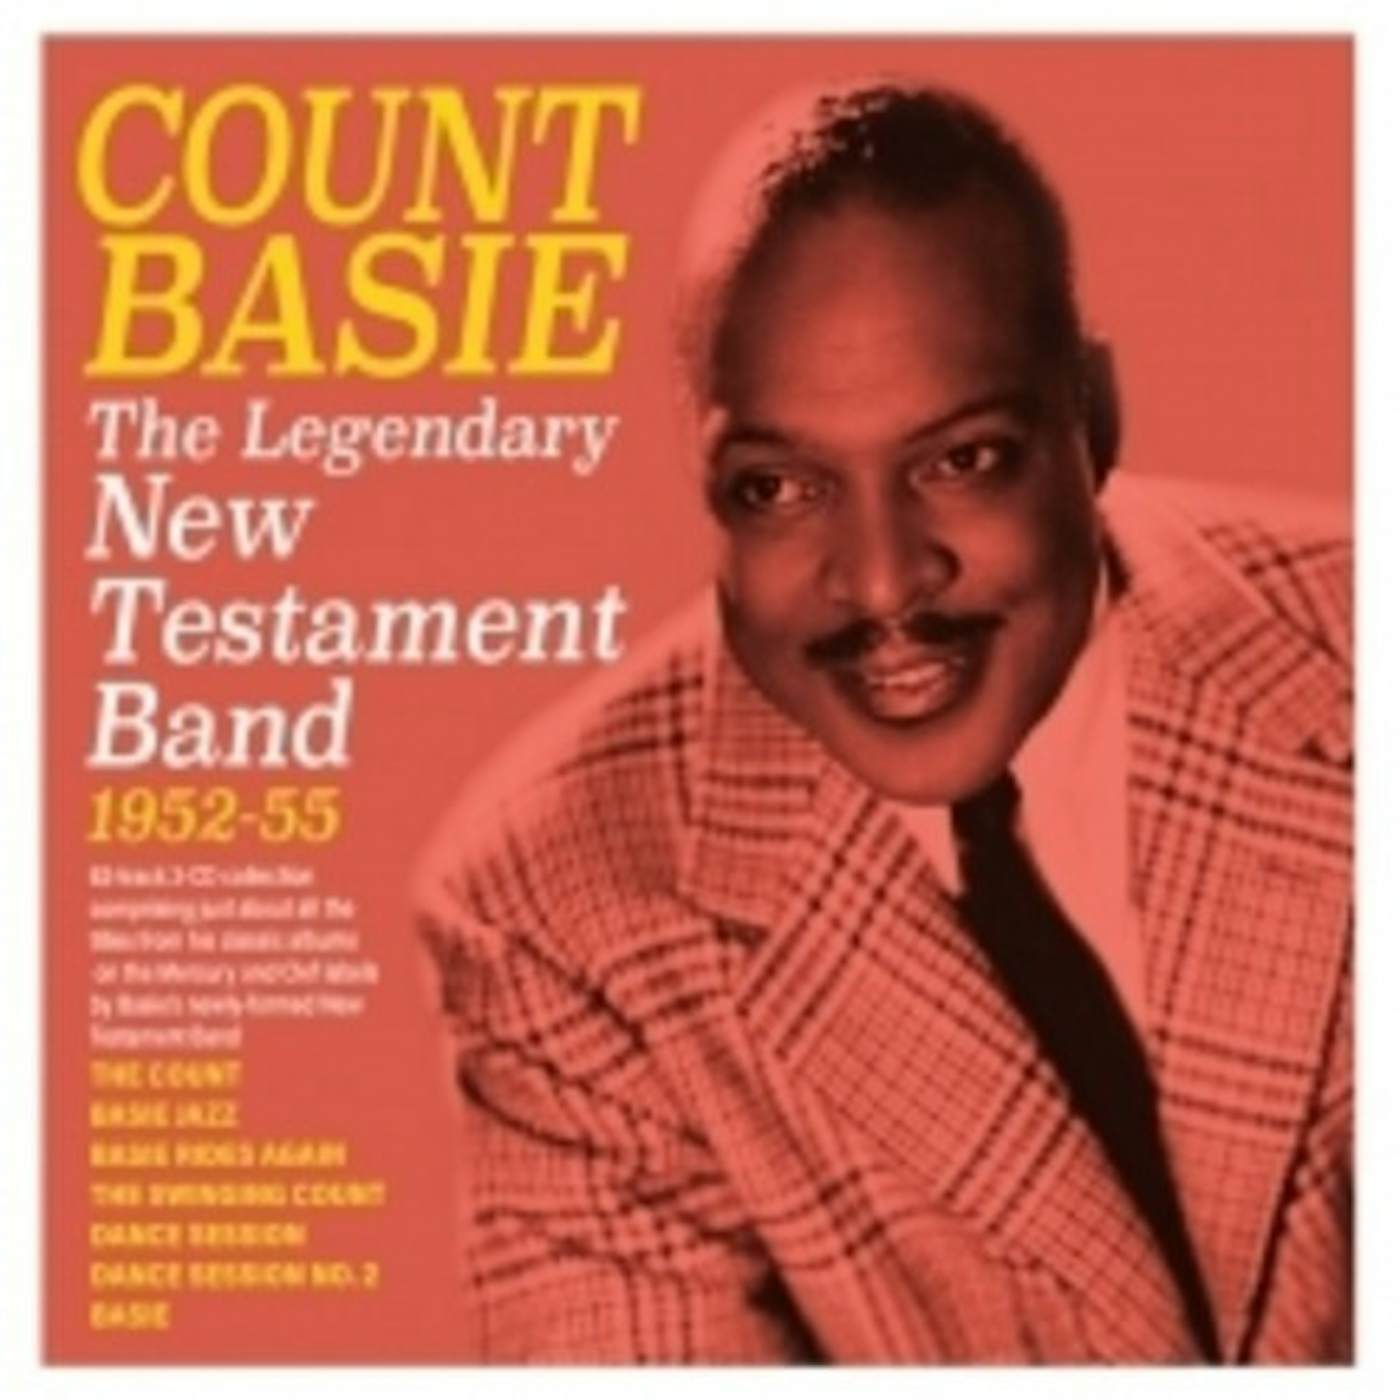 Count Basie LEGENDARY NEW TESTAMENT BAND 1952-55 CD